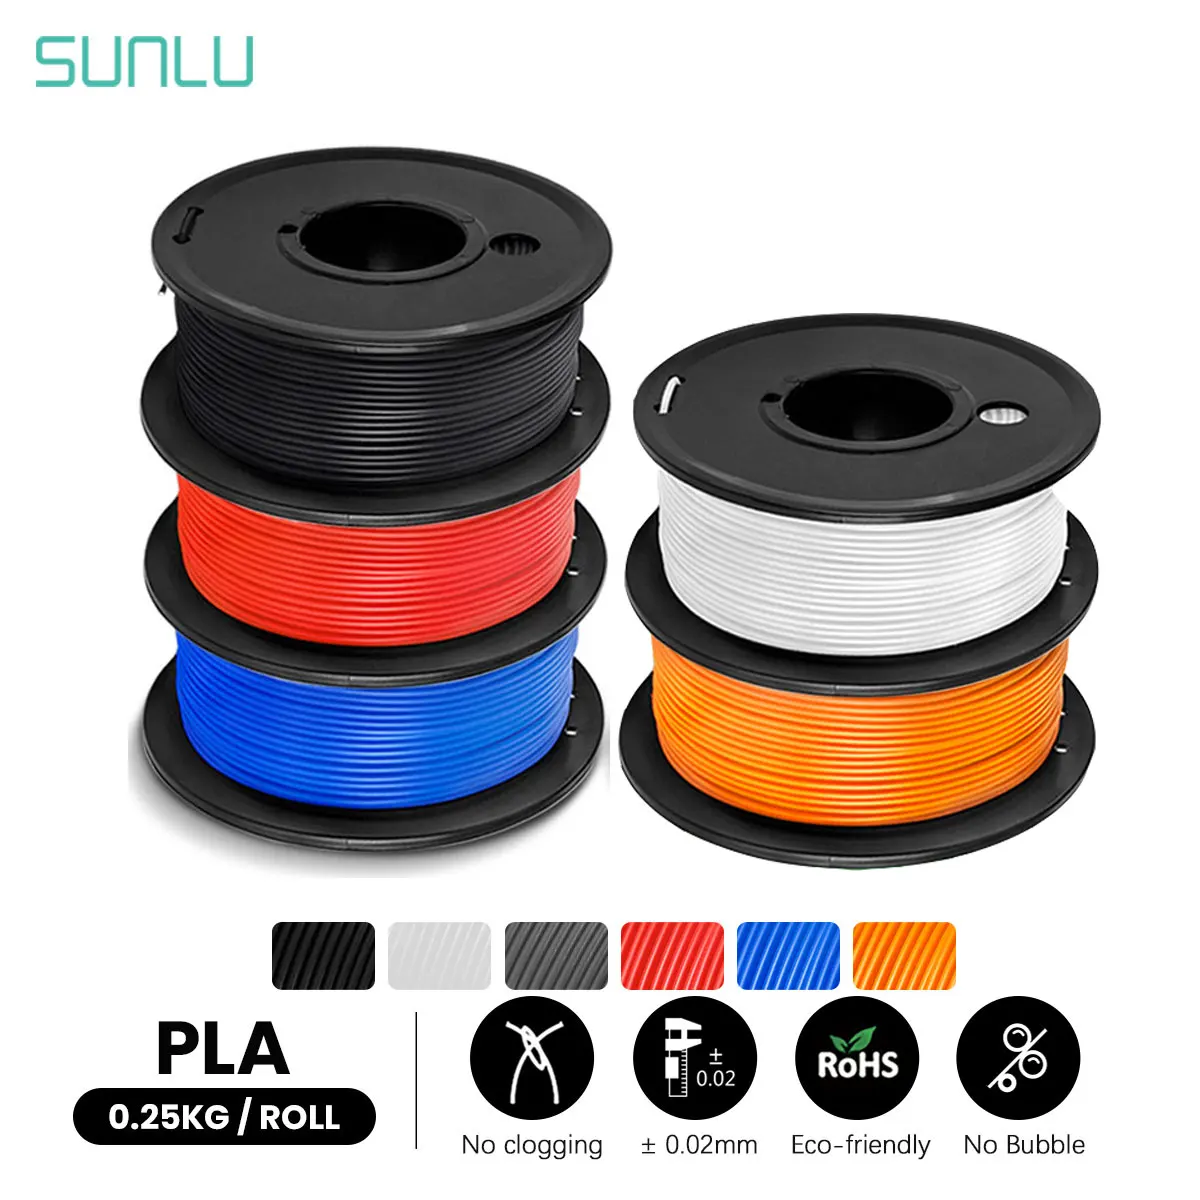 SUNLU 5Rolls PLA 1.75MM Filament 250G Net Weight Small Roll Less Wasting Odorless No Bubble Non-Toxic Eco-Friendly Free Shipping